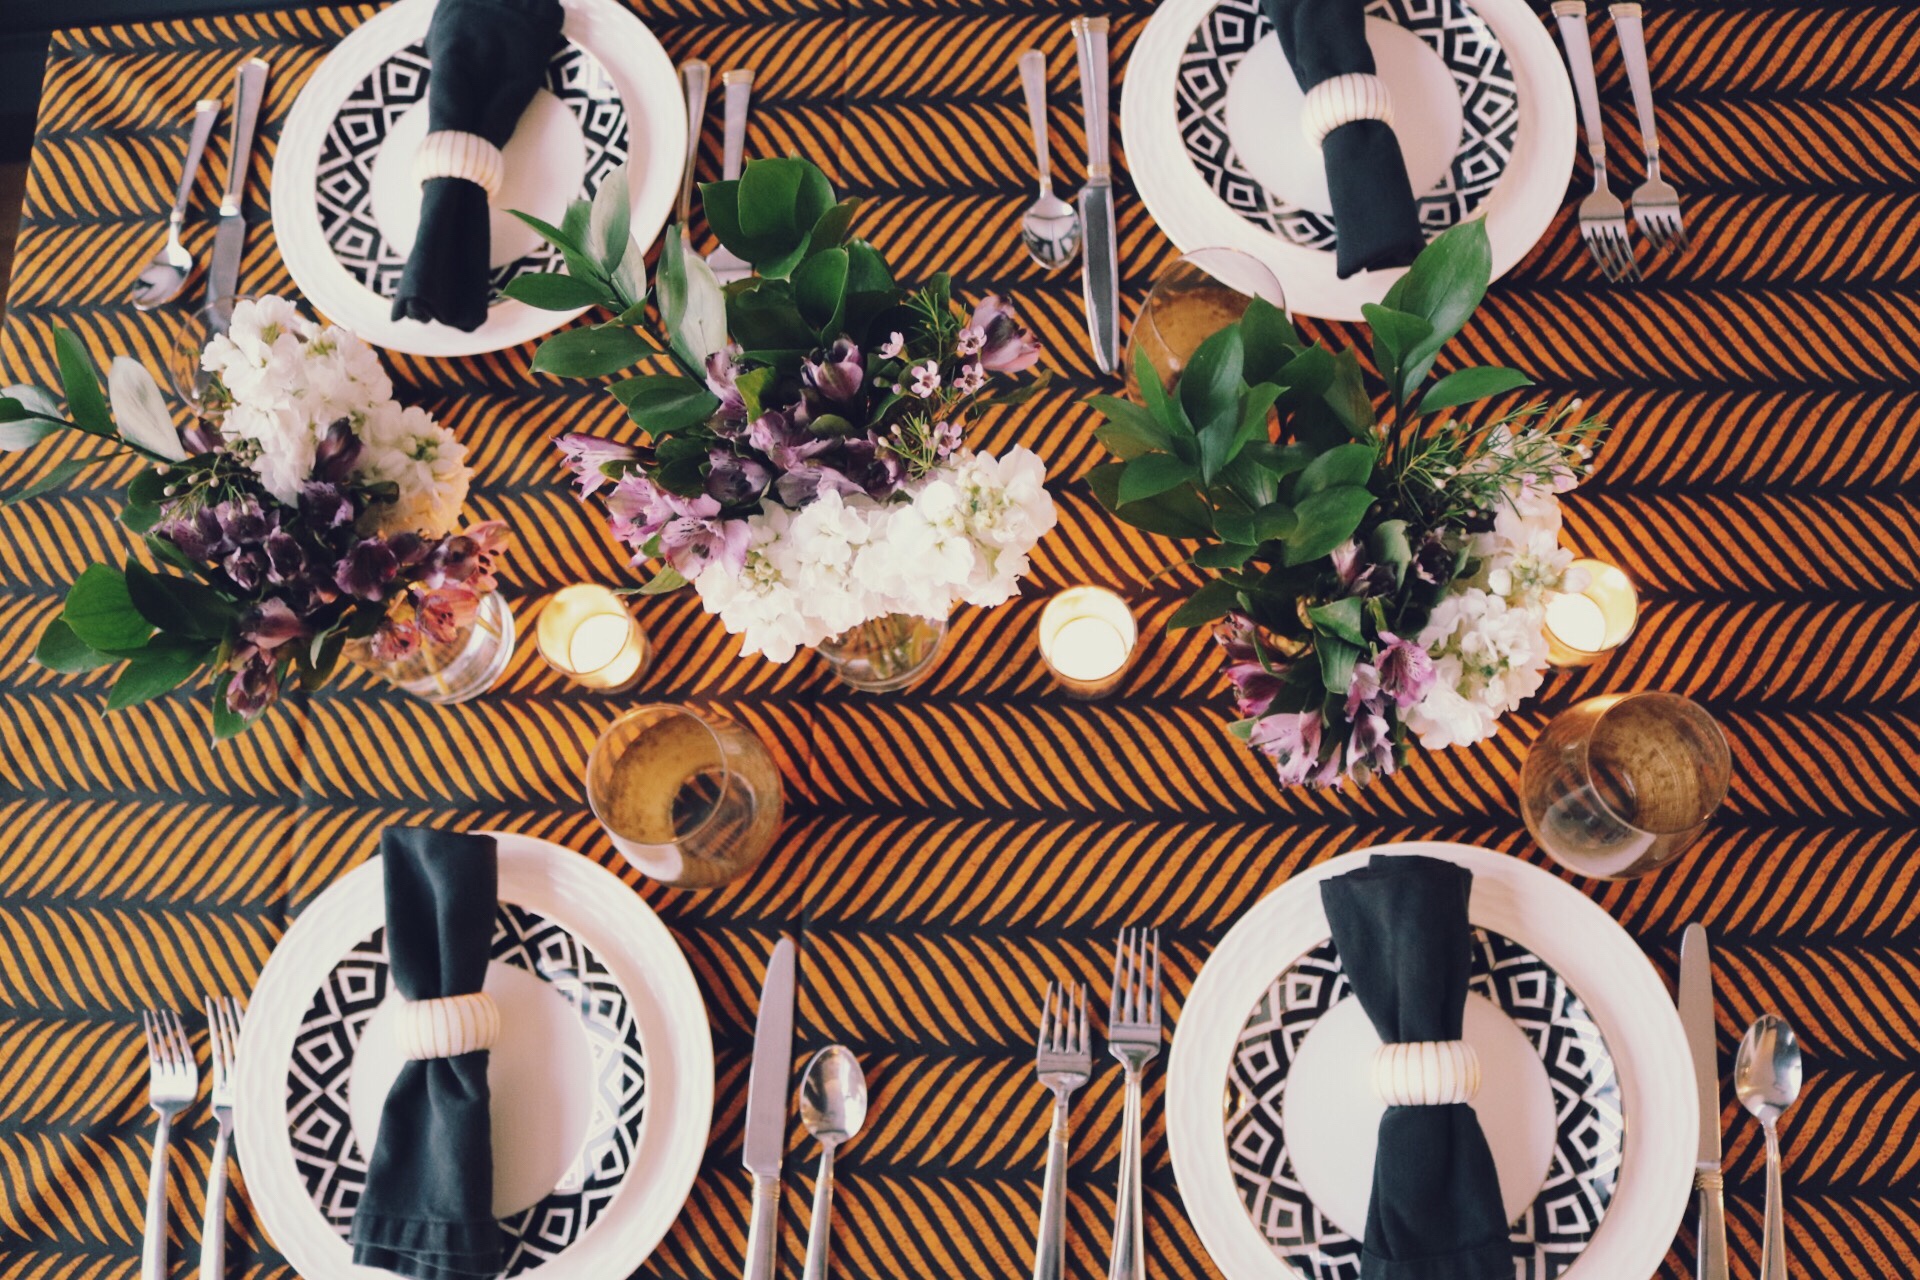 EASY WAYS TO CREATE A MEMORABLE TABLESCAPE